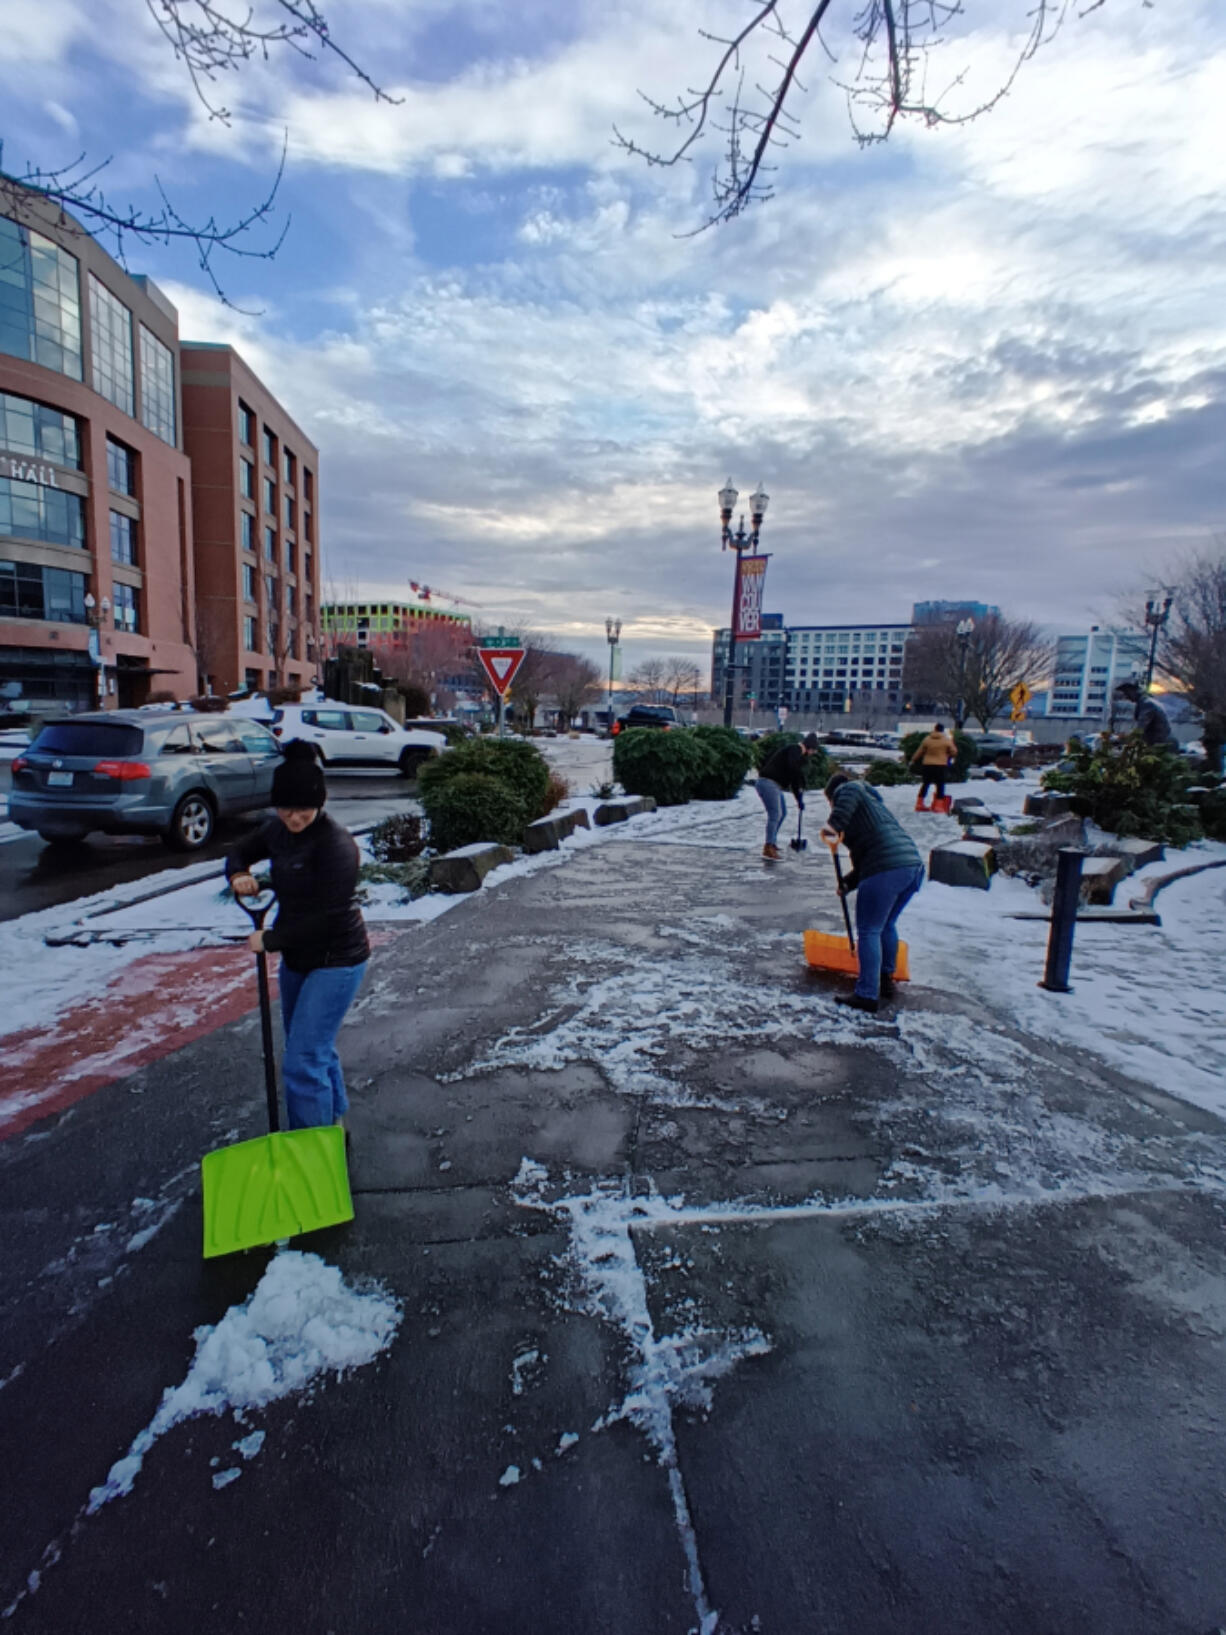 Vancouver Farmers Market staff and community members came together during January&rsquo;s ice storm to clear the area around the market, so vendors could sell their products despite the cold.